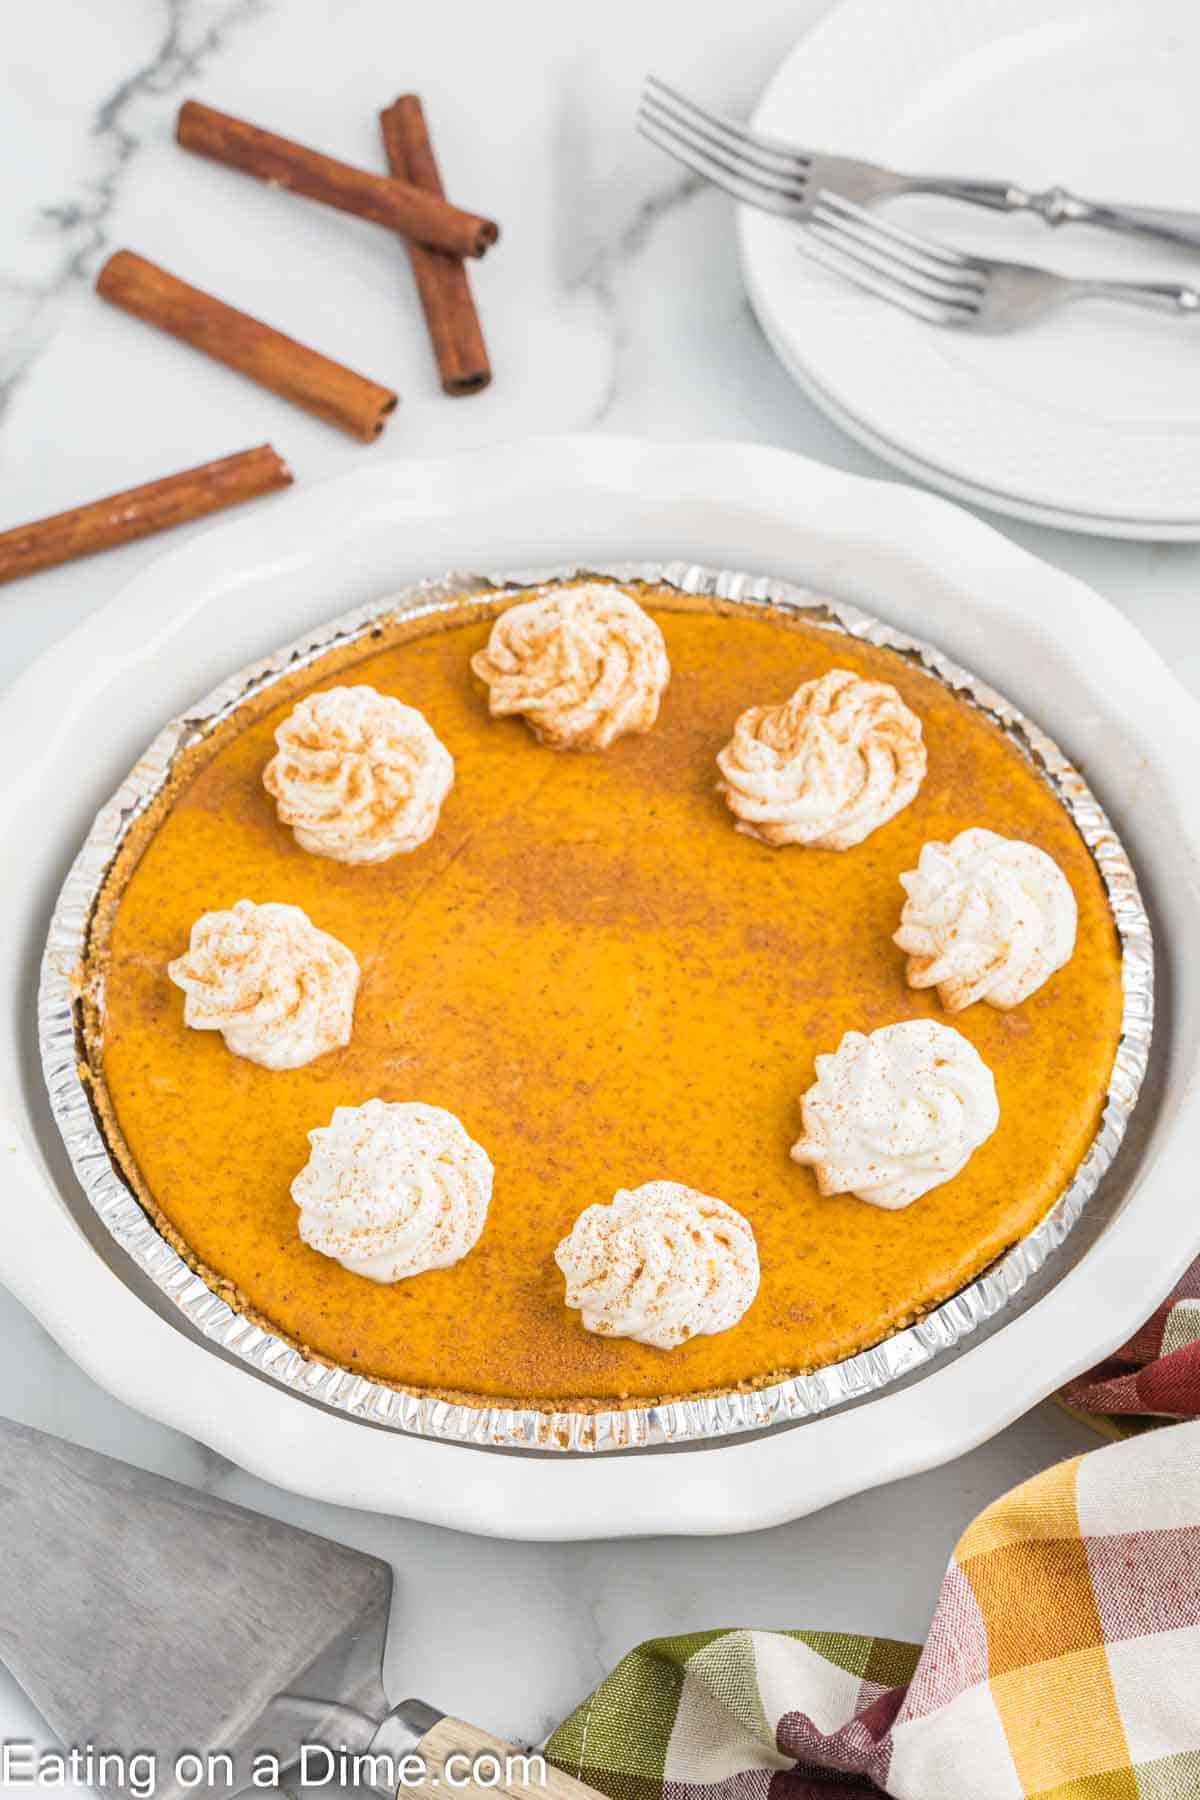 A whole pumpkin pie in a foil pie tin is topped with dollops of whipped cream evenly spaced around the edge. Three cinnamon sticks and two stacked white plates with forks are in the background. A colorful fabric napkin is partially visible in the corner, hinting at flavors similar to a delightful pumpkin cheesecake.